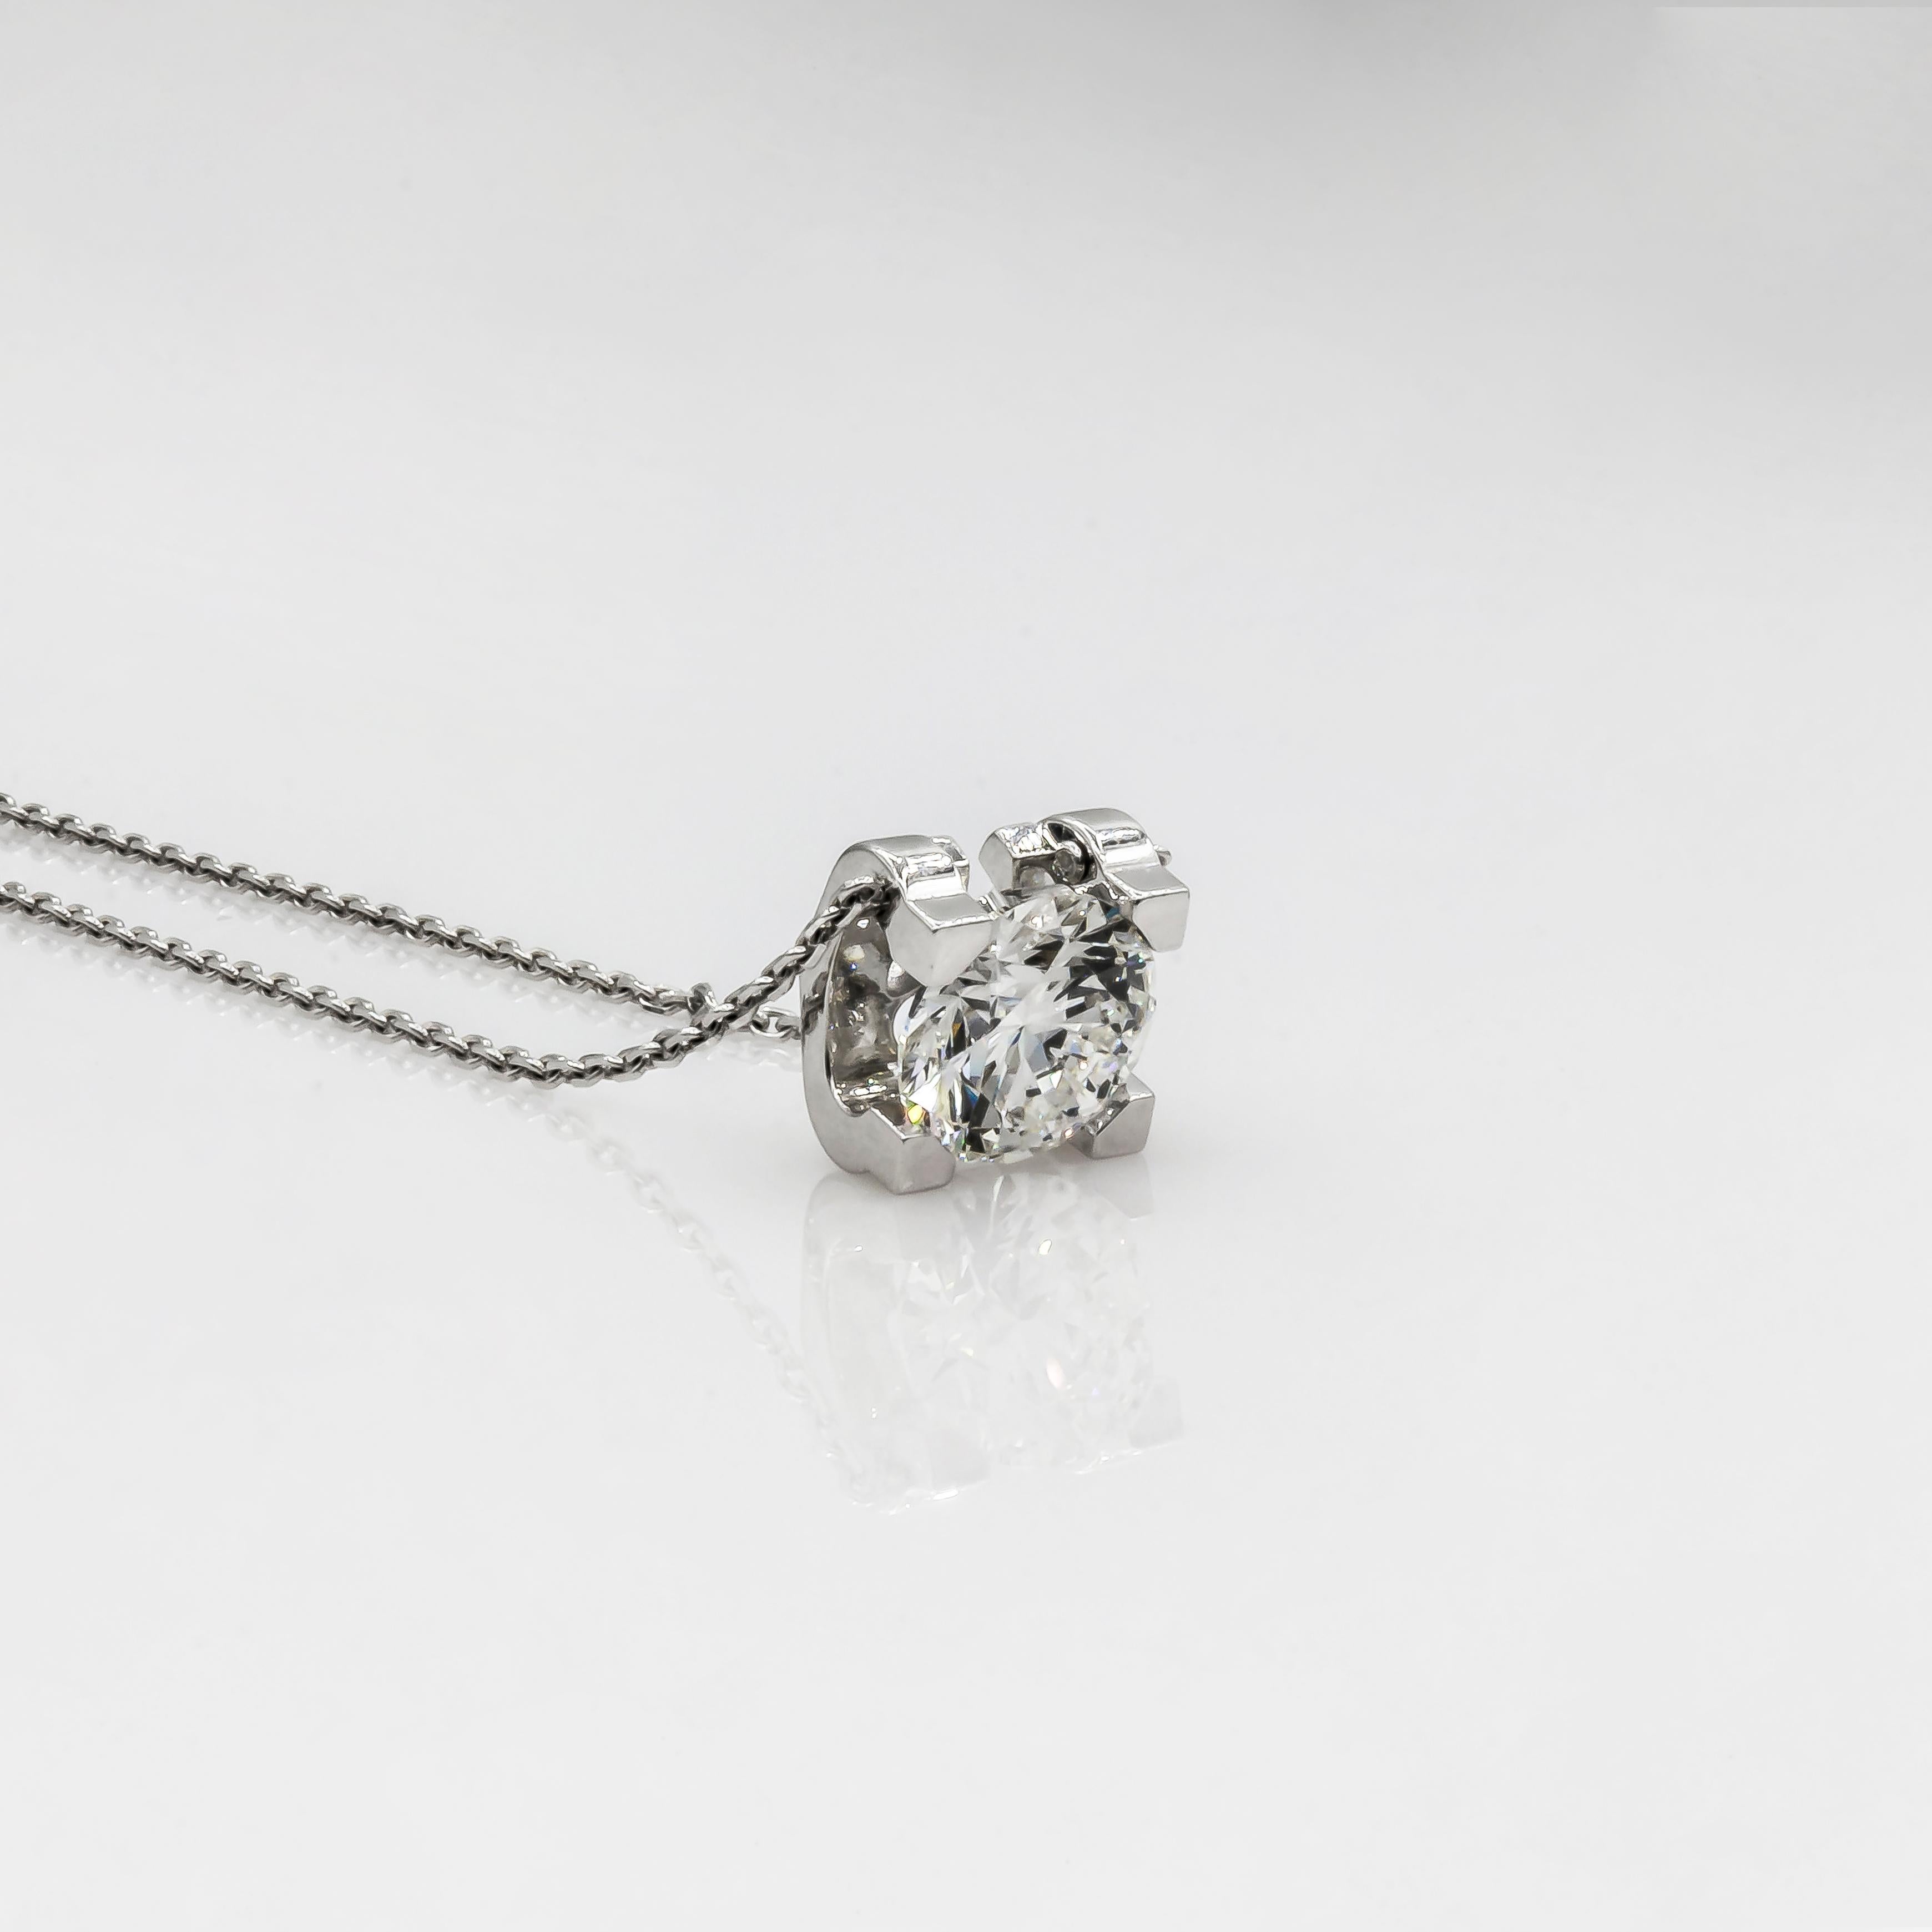 Beautiful and classic Cartier diamond 18K white gold pendant. Features one GIA certified round brilliant diamond 1.70 carat, G color and VS1 clarity. The diamond is Excellent in Cut, Polish and Symmetry with no fluorescence Two letter 